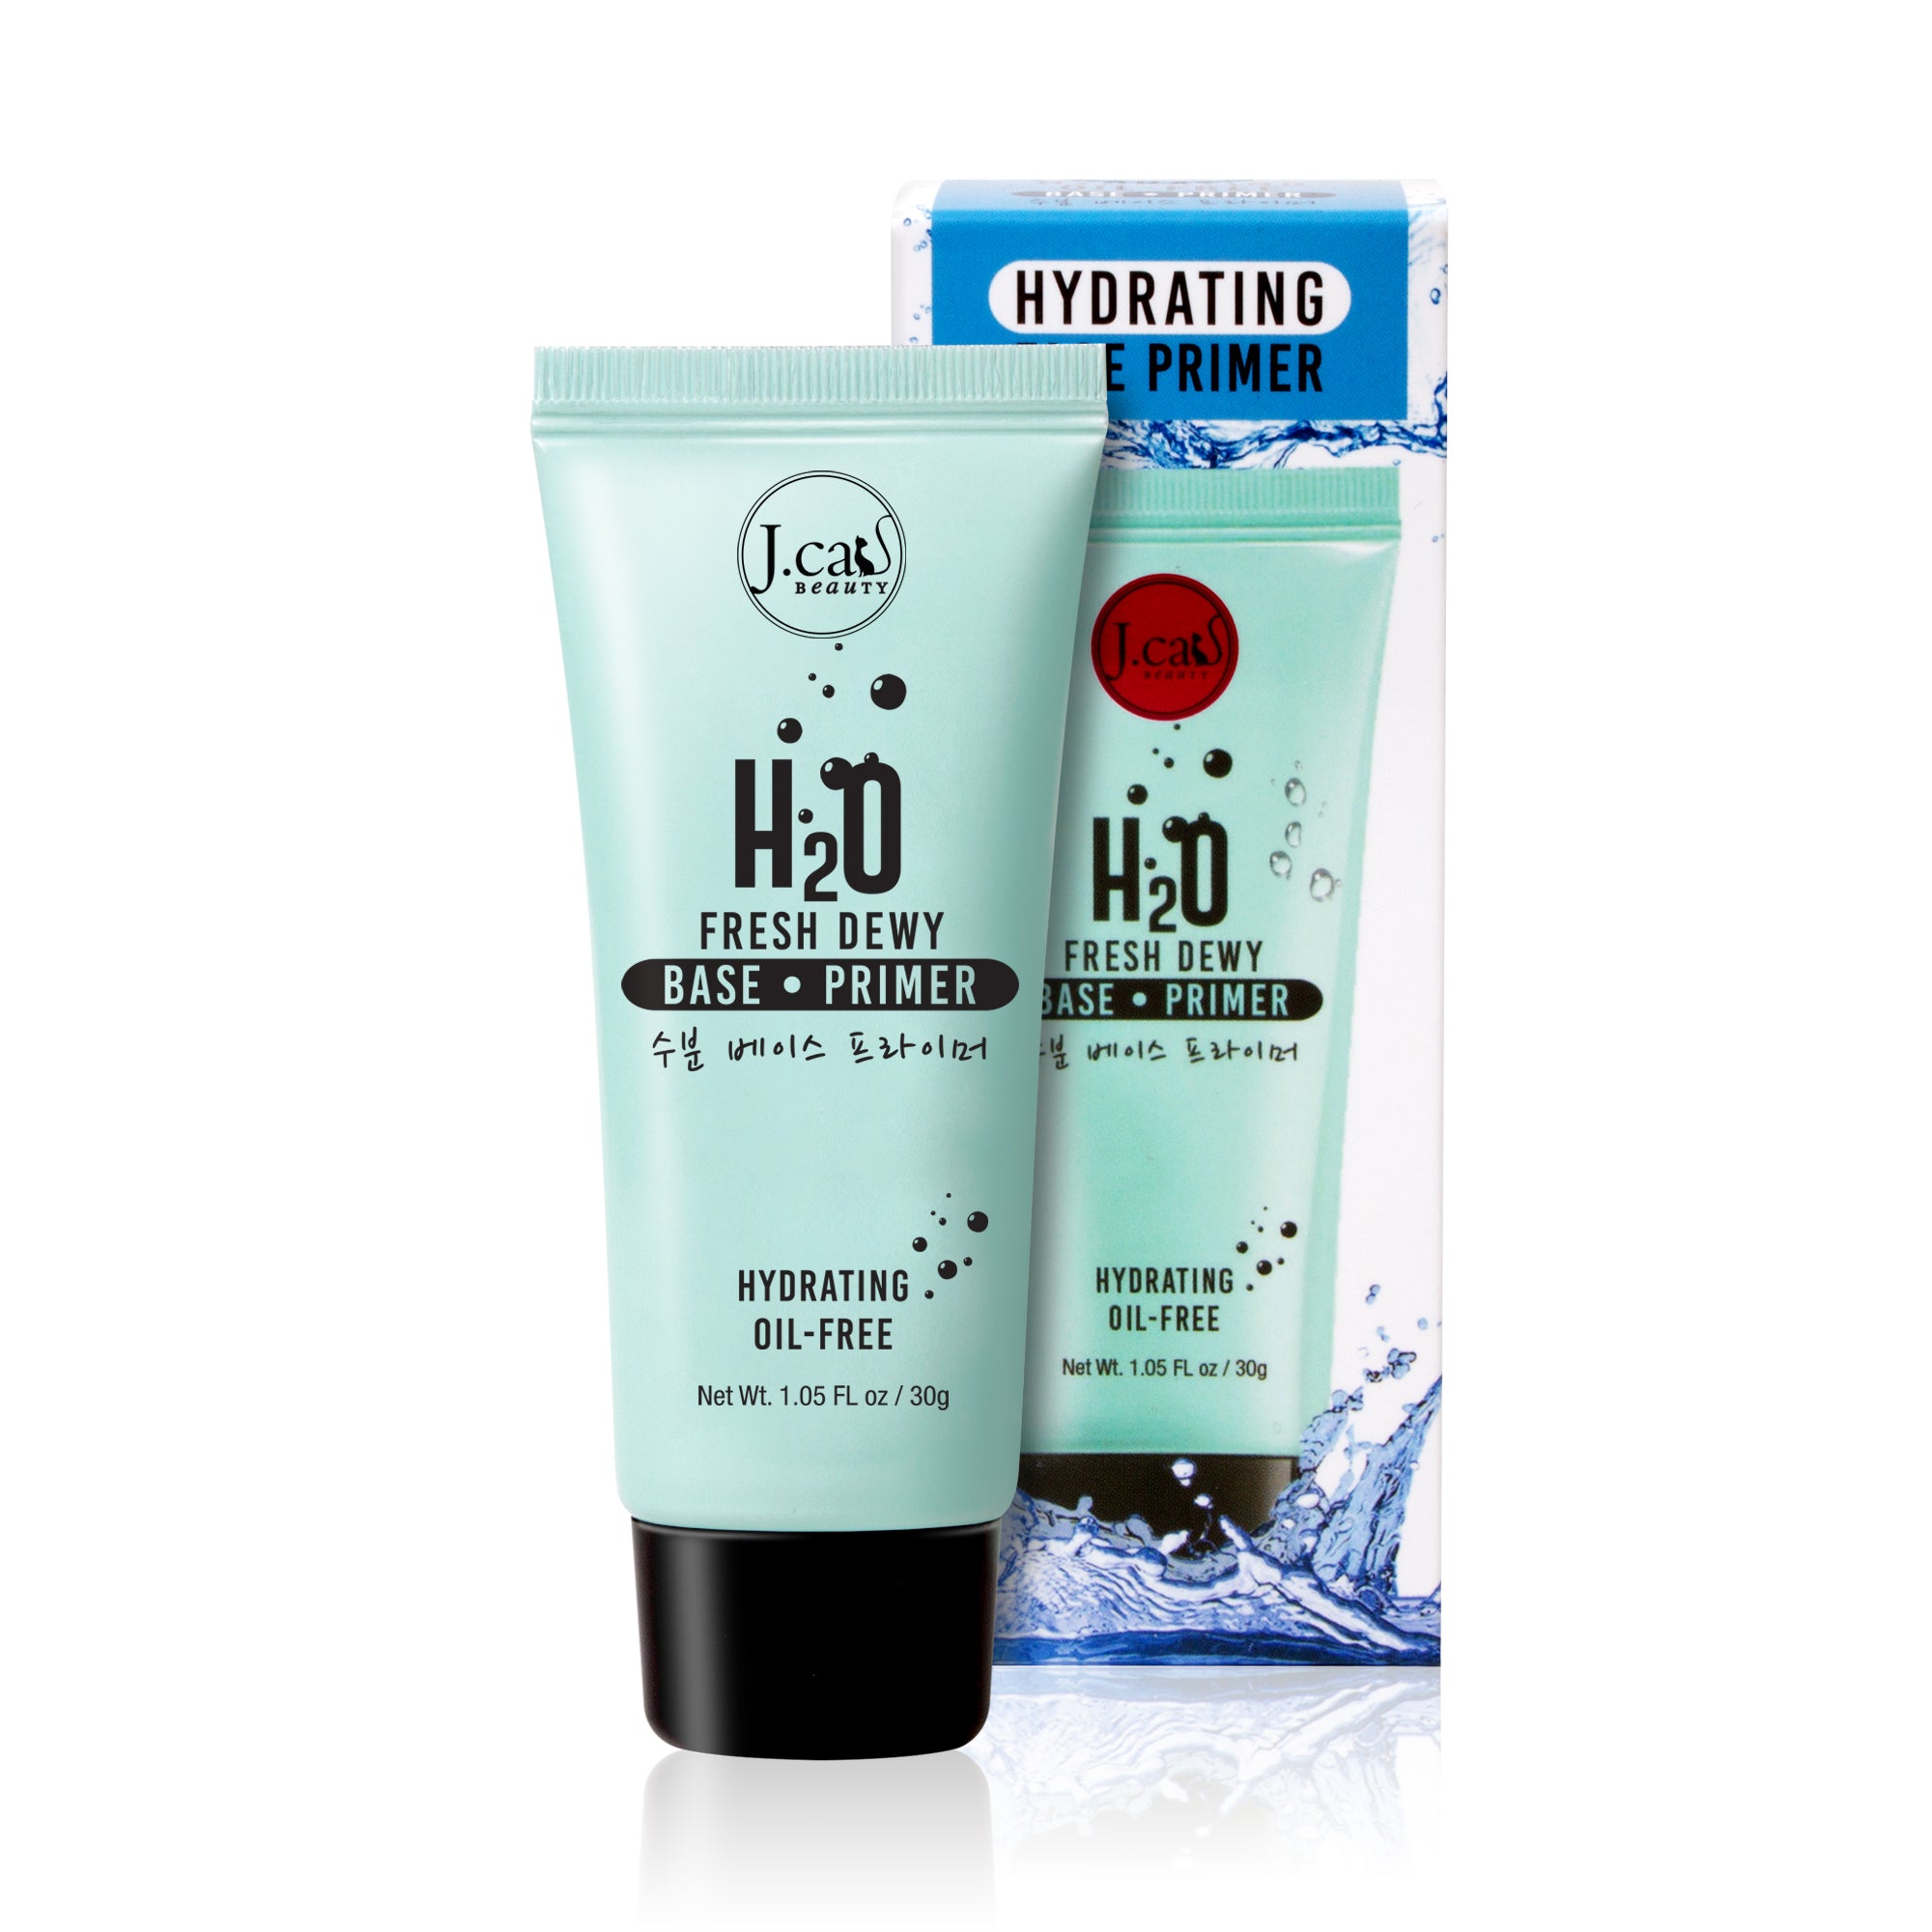 H20 Hydrating Face Primer